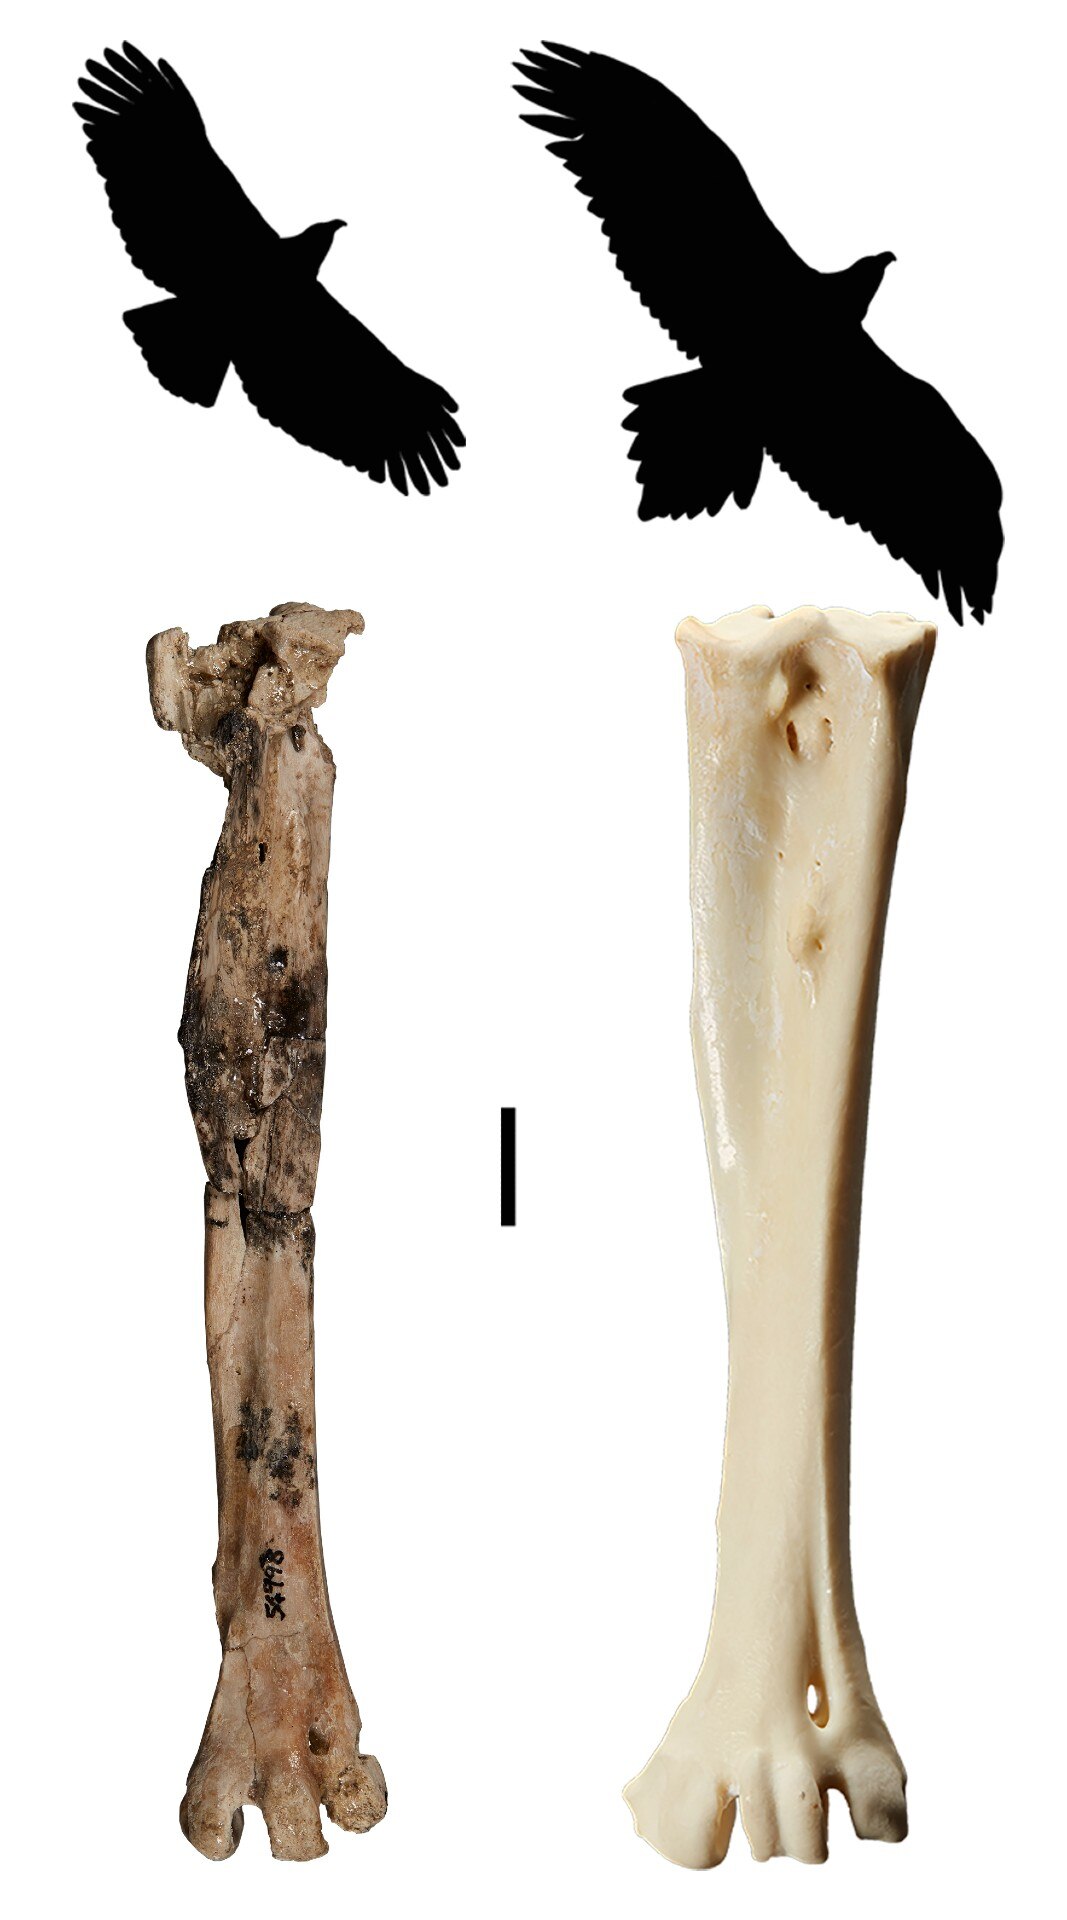 Two silhouettes of eagles and two leg bones